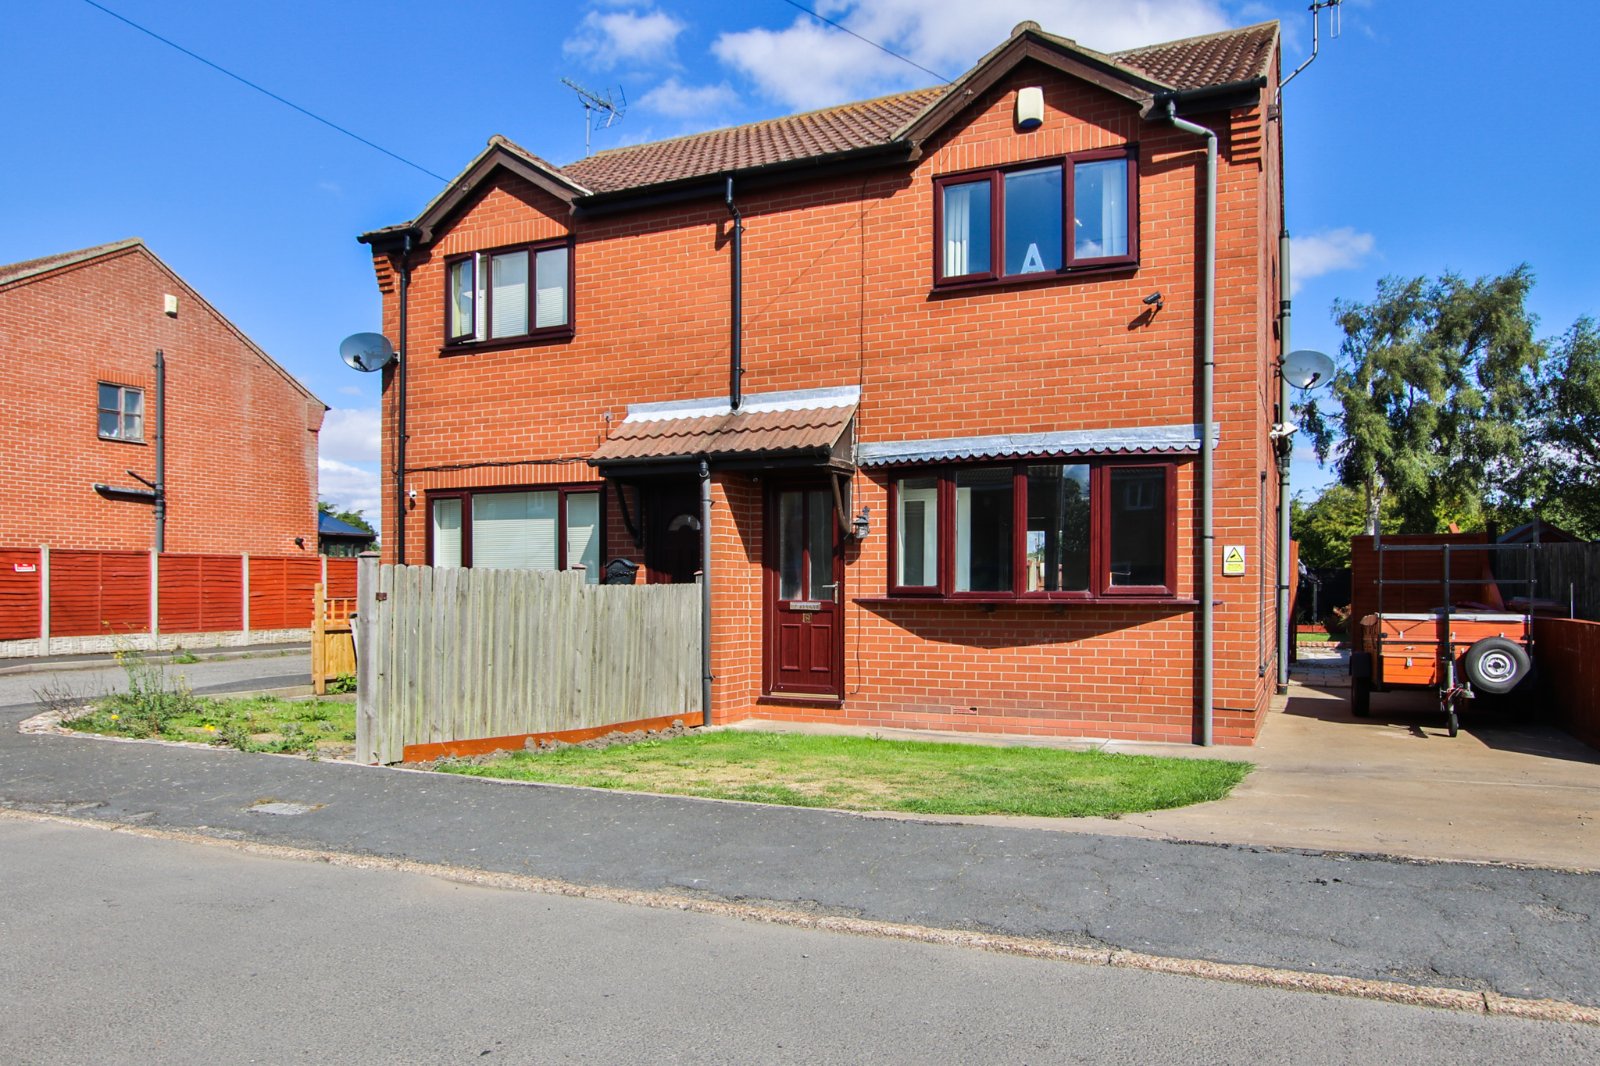 3 bed house for sale in Oxmarsh Lane, New Holland, DN19